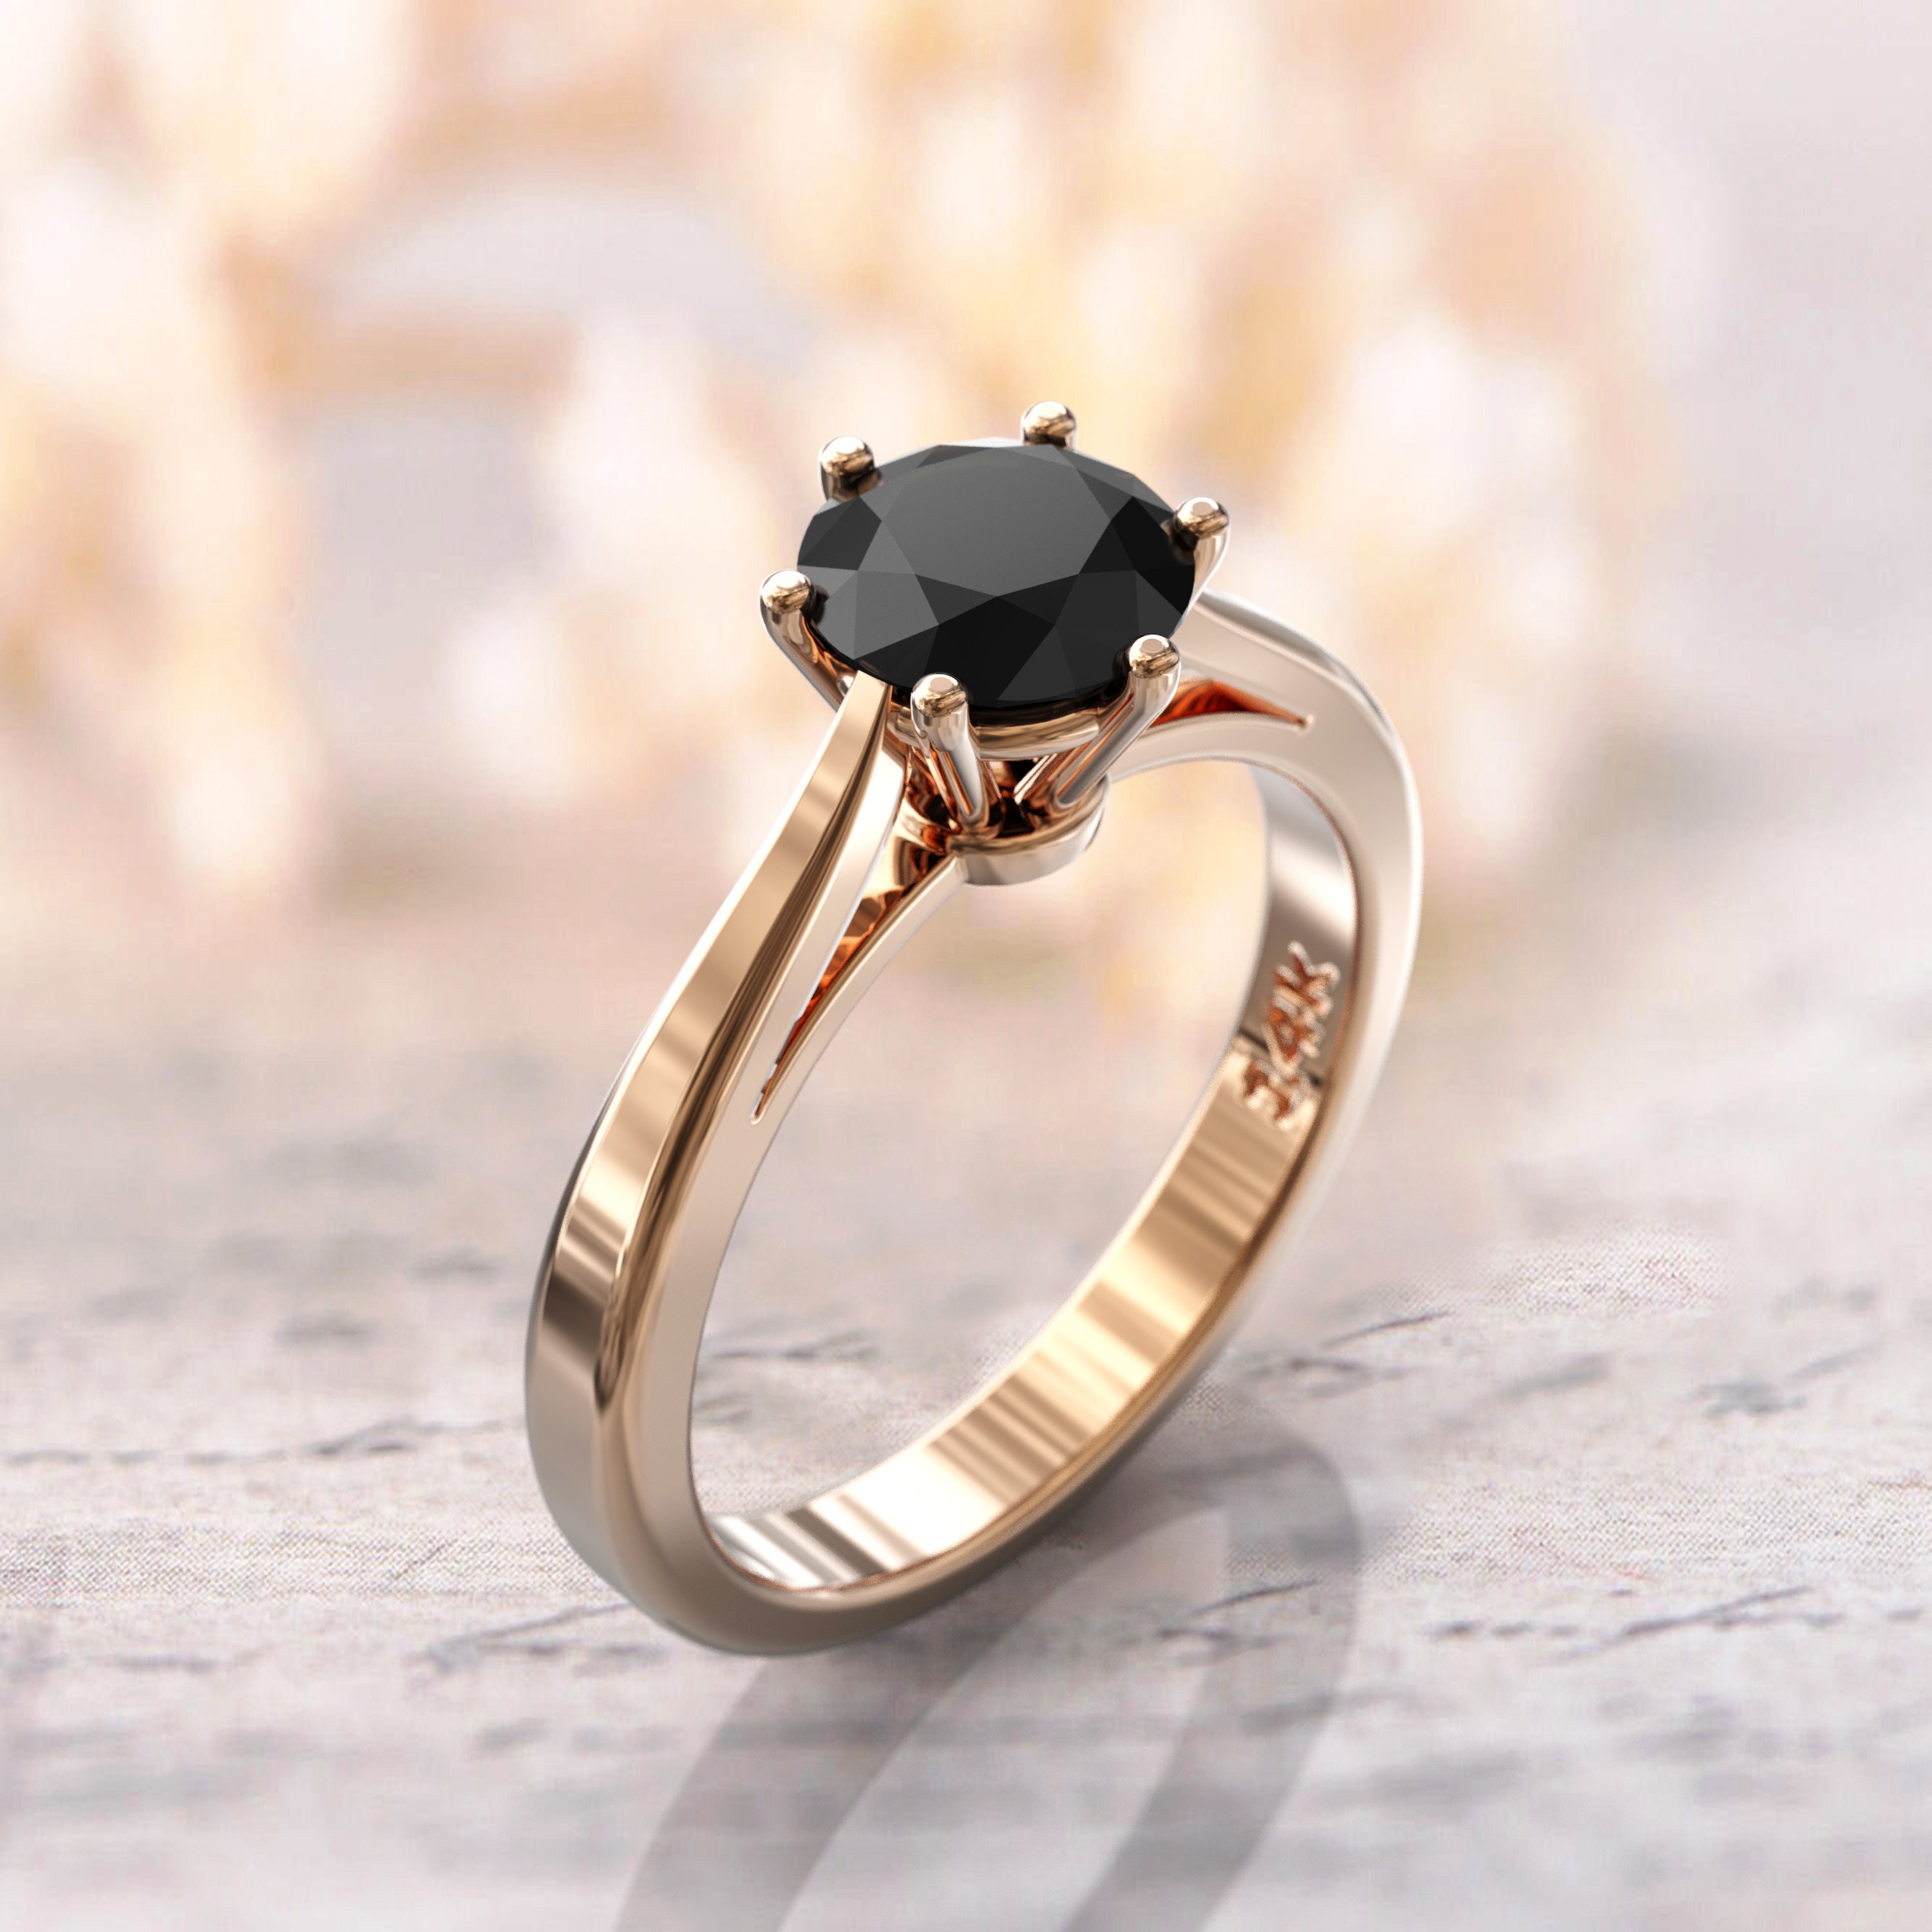 Black Diamond Meaning | With Clarity